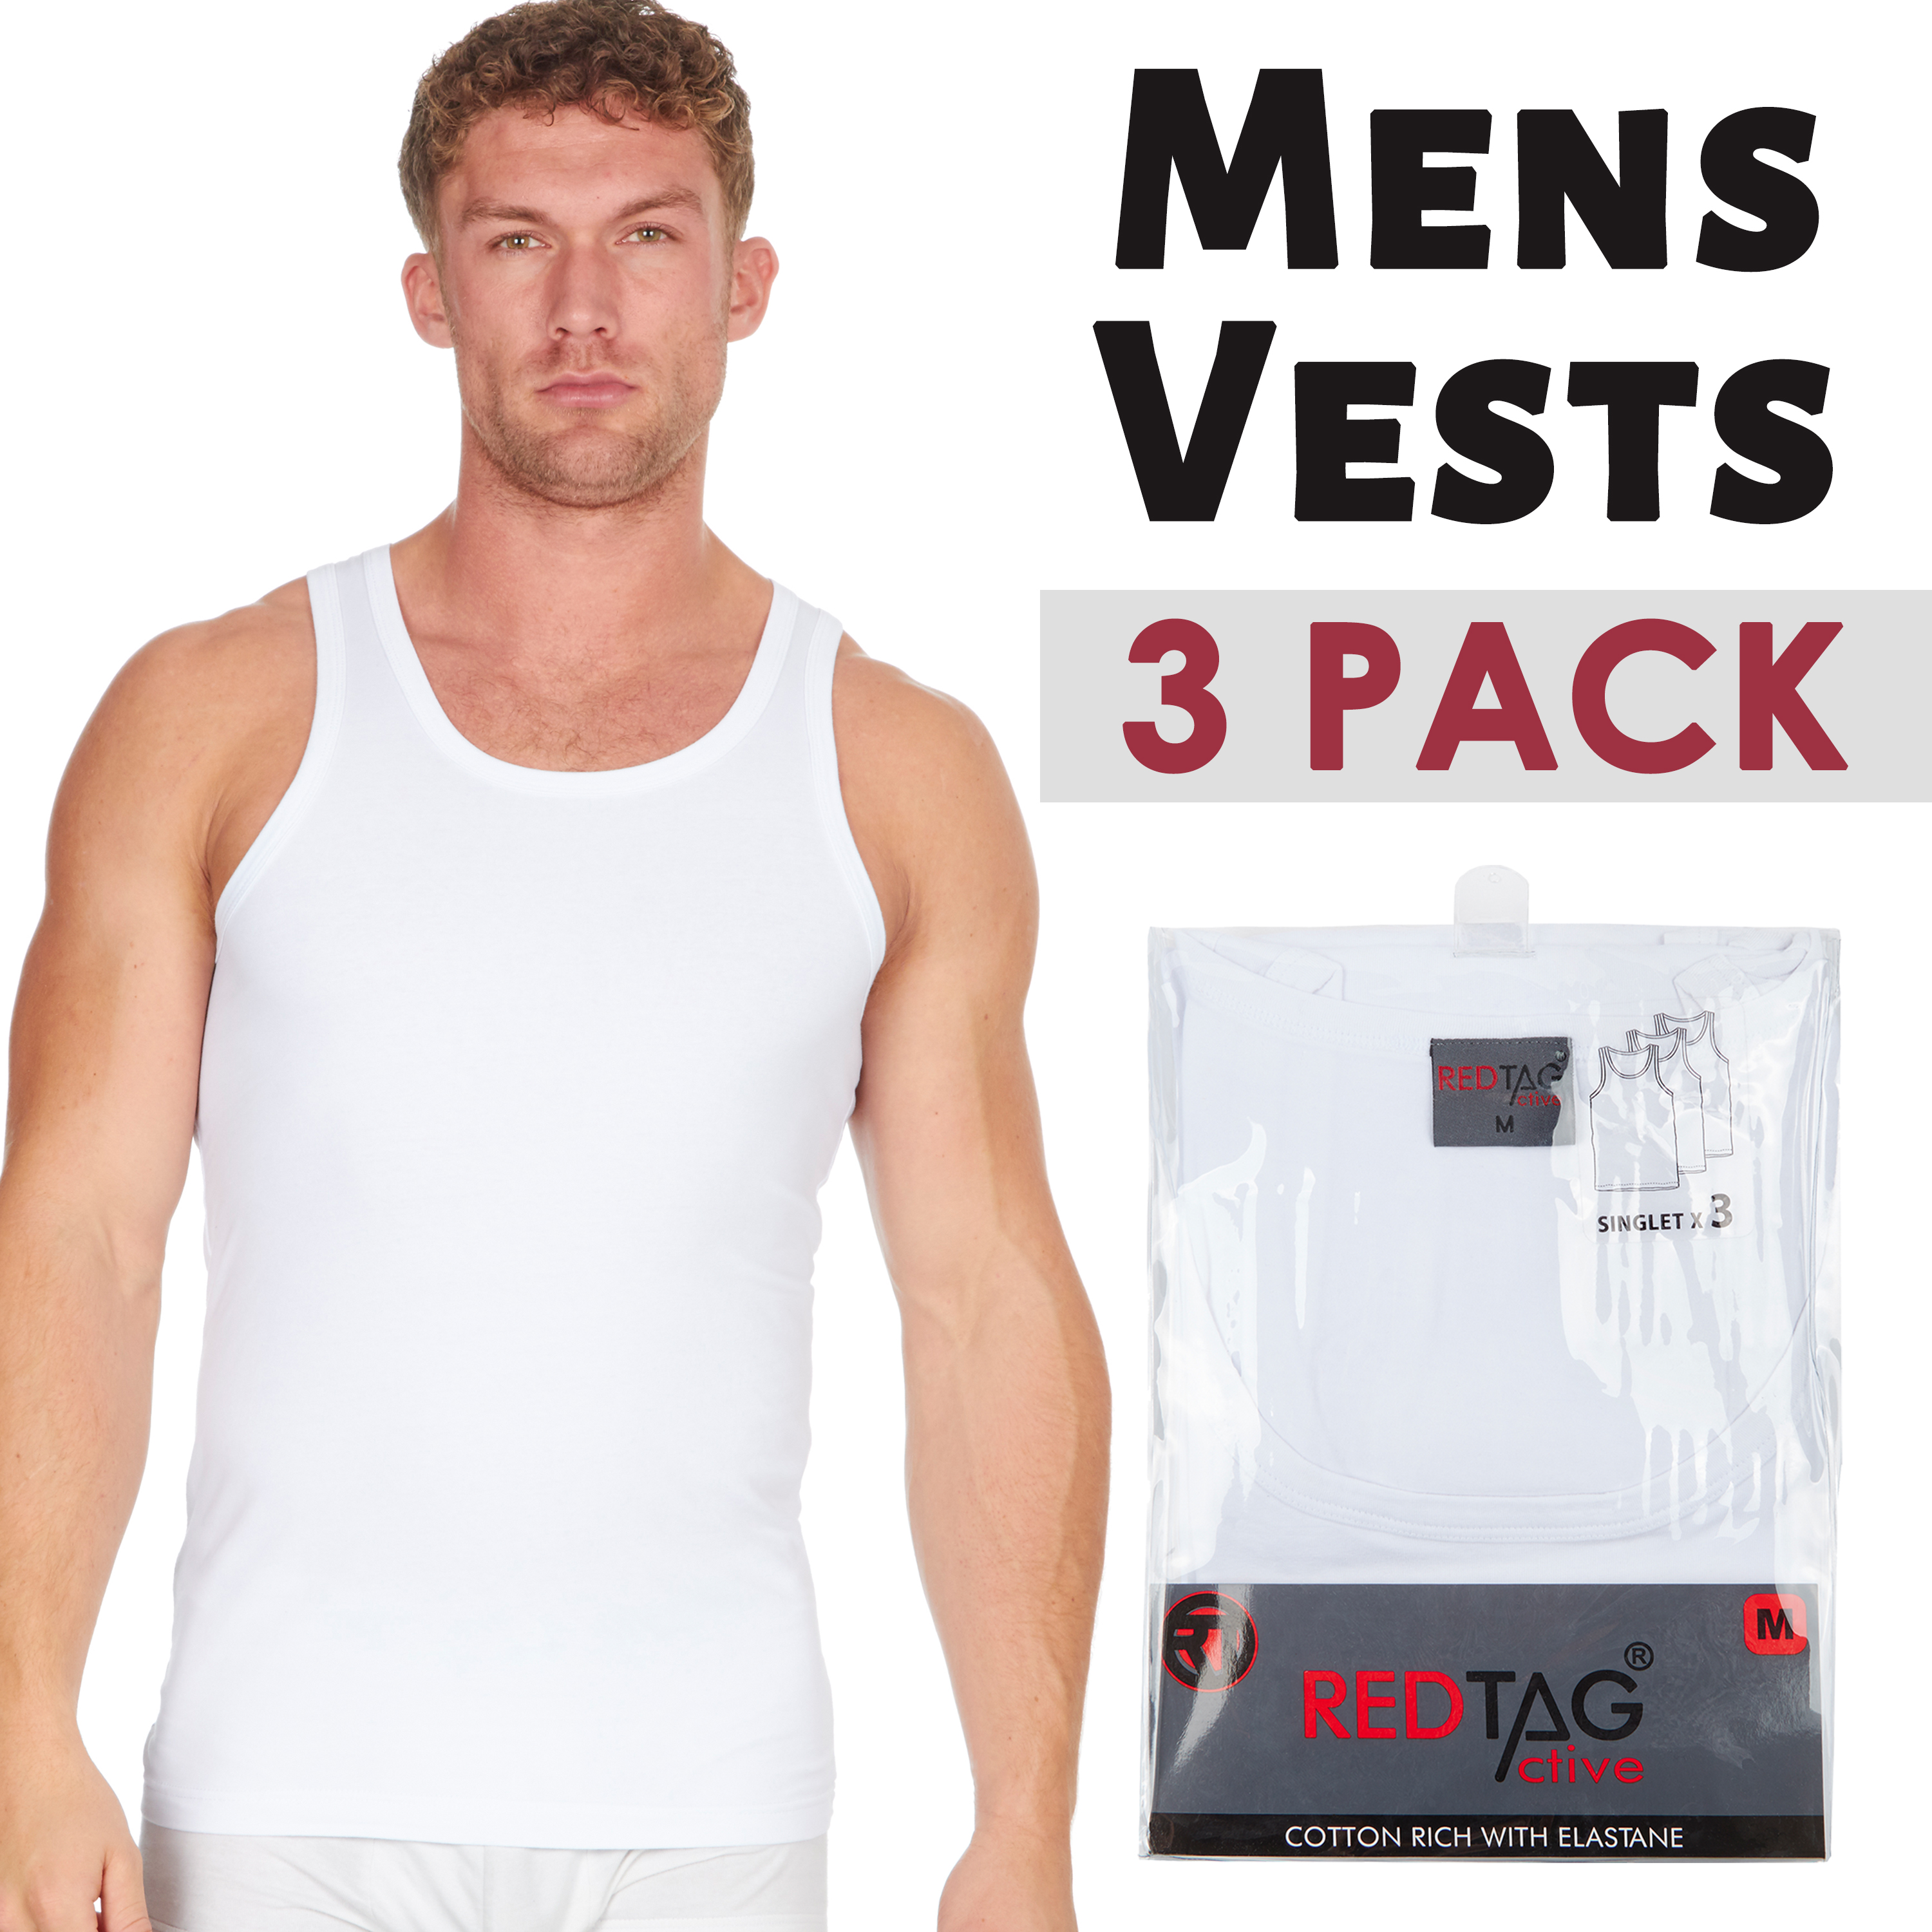 Pack of 3 and 6 Mens 100% Finest Cotton Summer Weight Singlet Vests Body Building Training Gym Underwear/White/Available in Sizes Small/Medium/Large/X Large/XX Large 